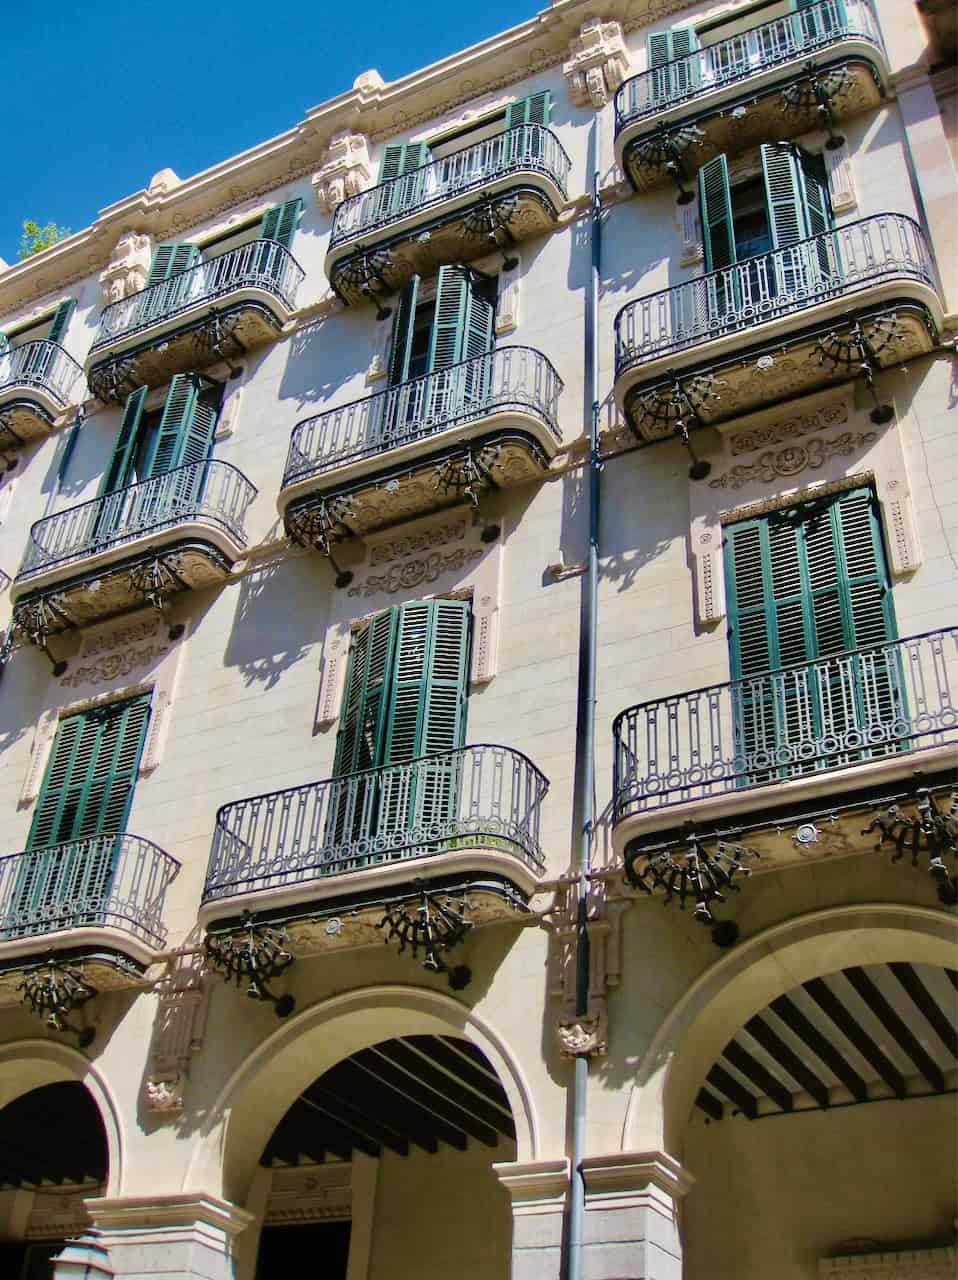 The buildings of Palma